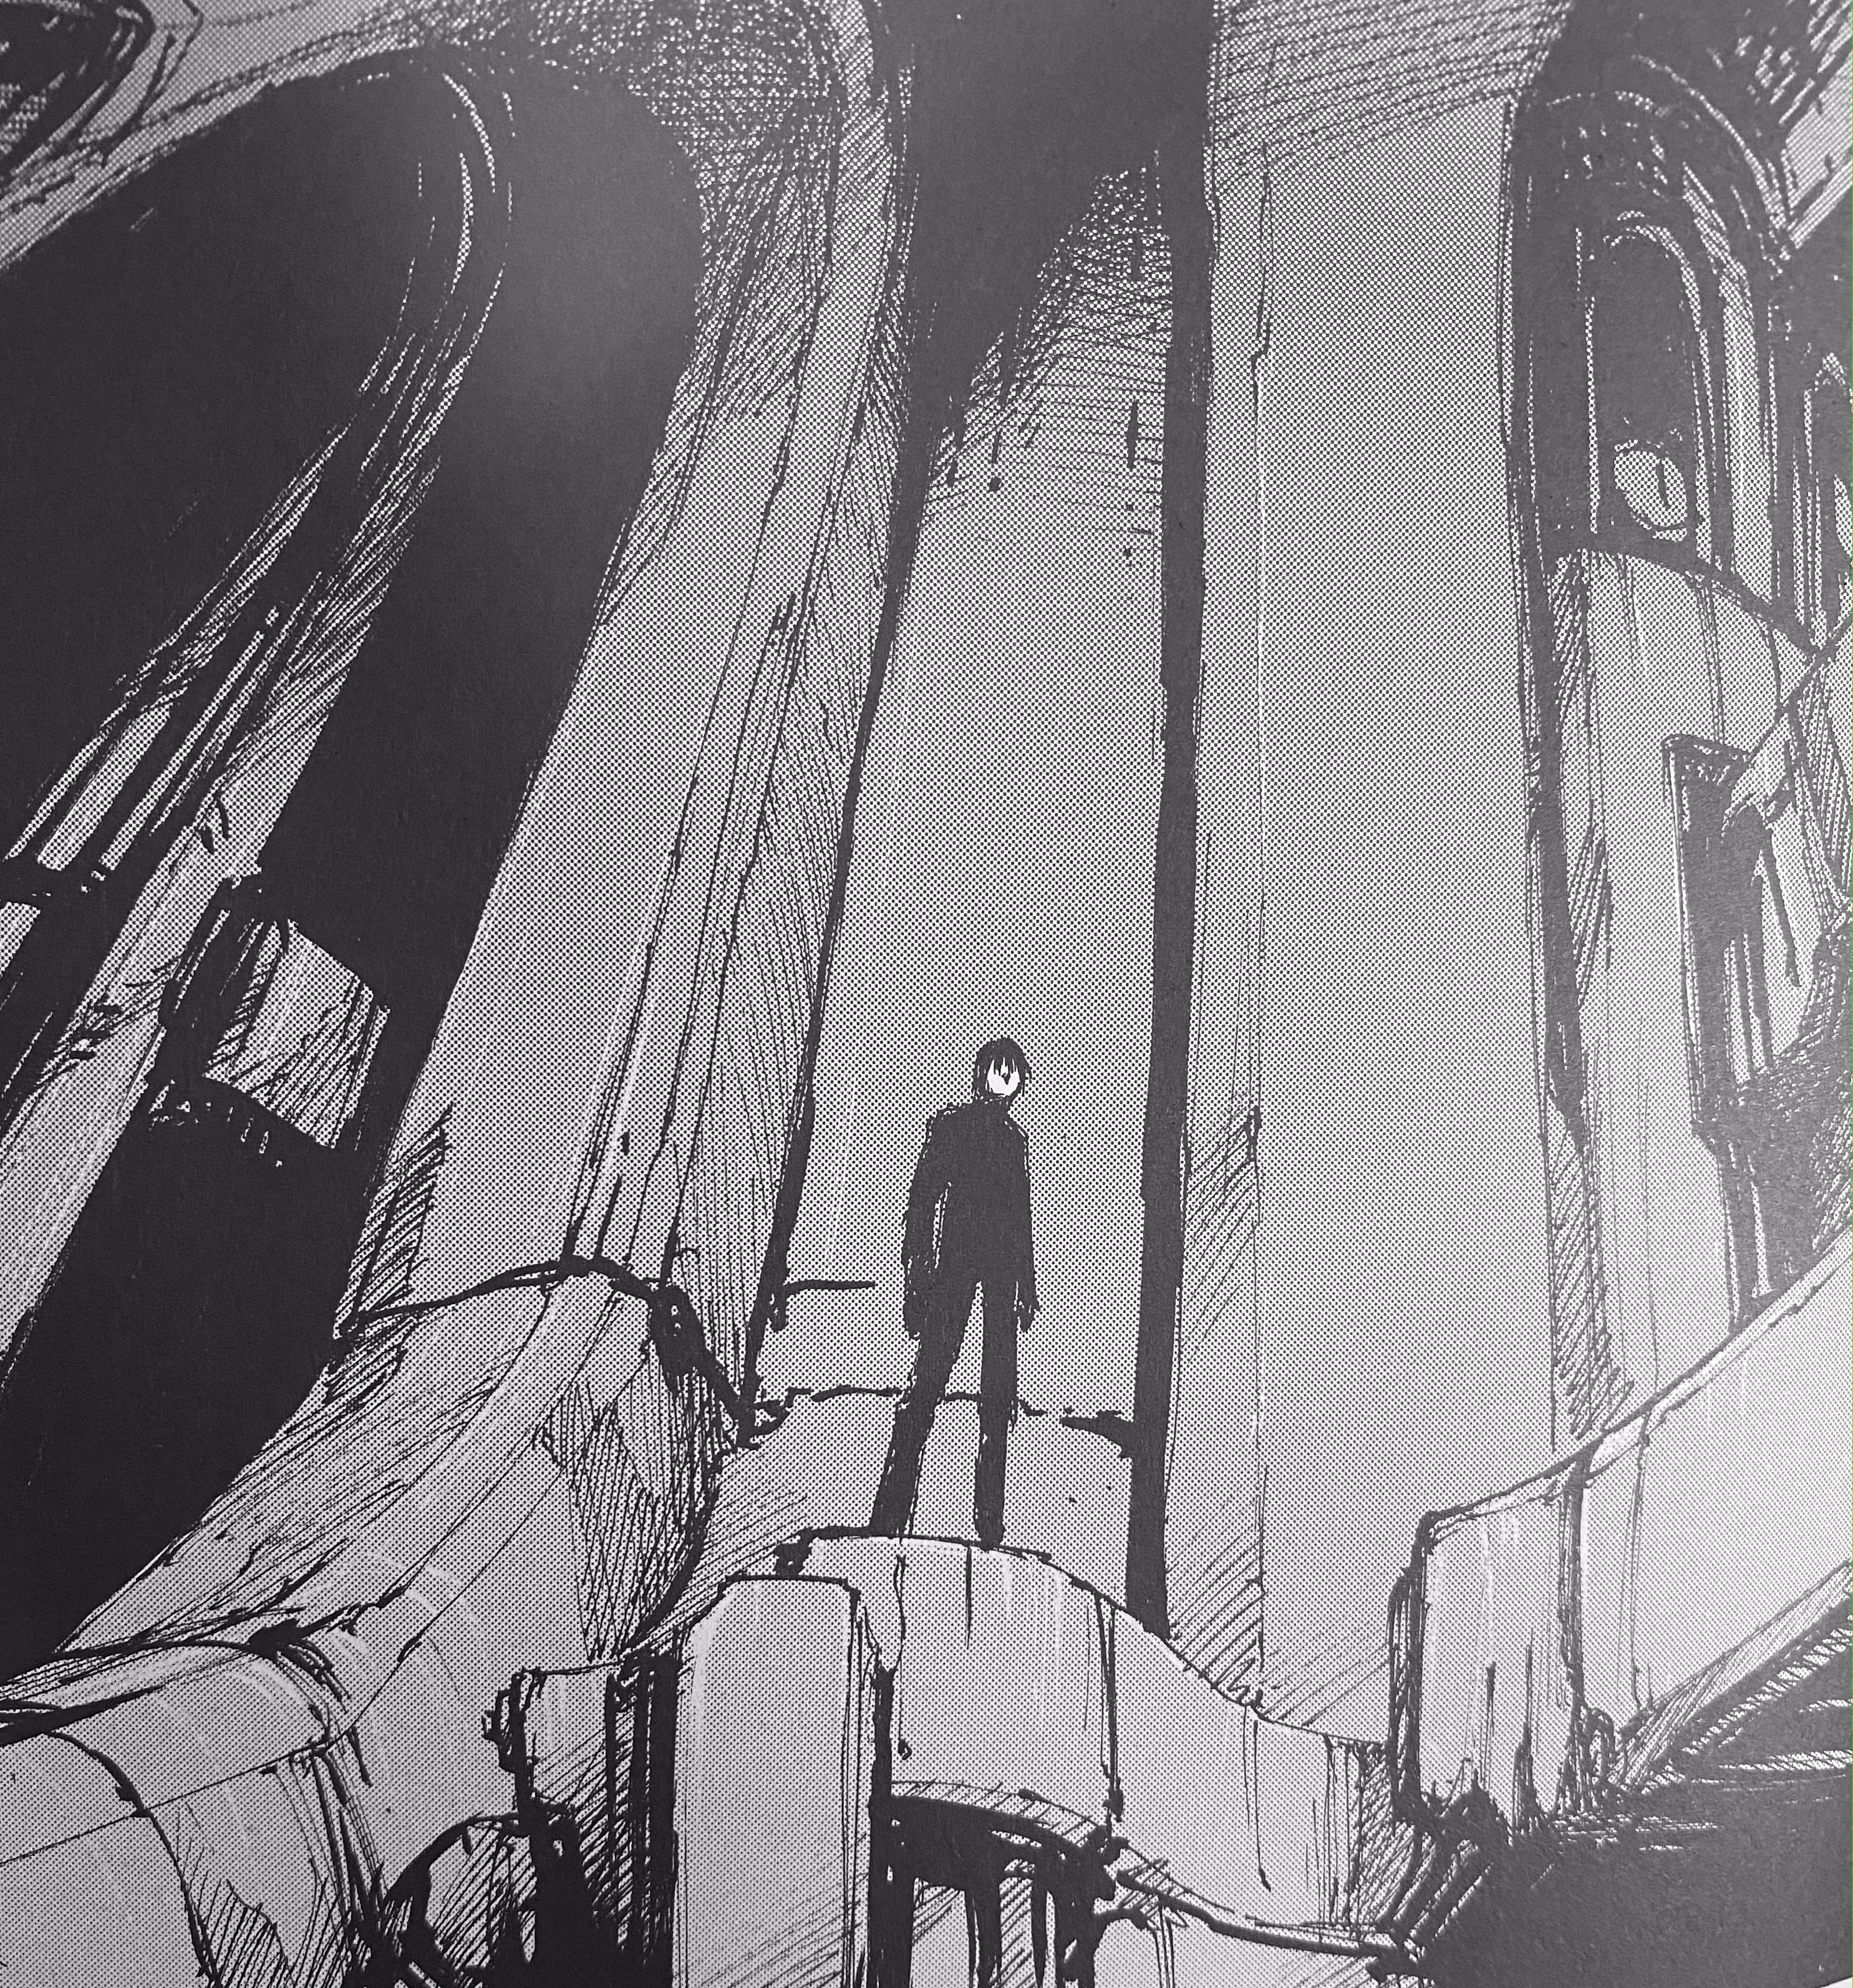 littleee guy, hes just a littol man. its so fun when nihei draws him all small and far away <br><br> [image id: kyrii standing on a ledge in the megastructure. he is small in comparison to the large archways that loom over him. he is angled so the viewer is looking up at him, and only his silhouette, hair, and nose are distinguishable. /end id]